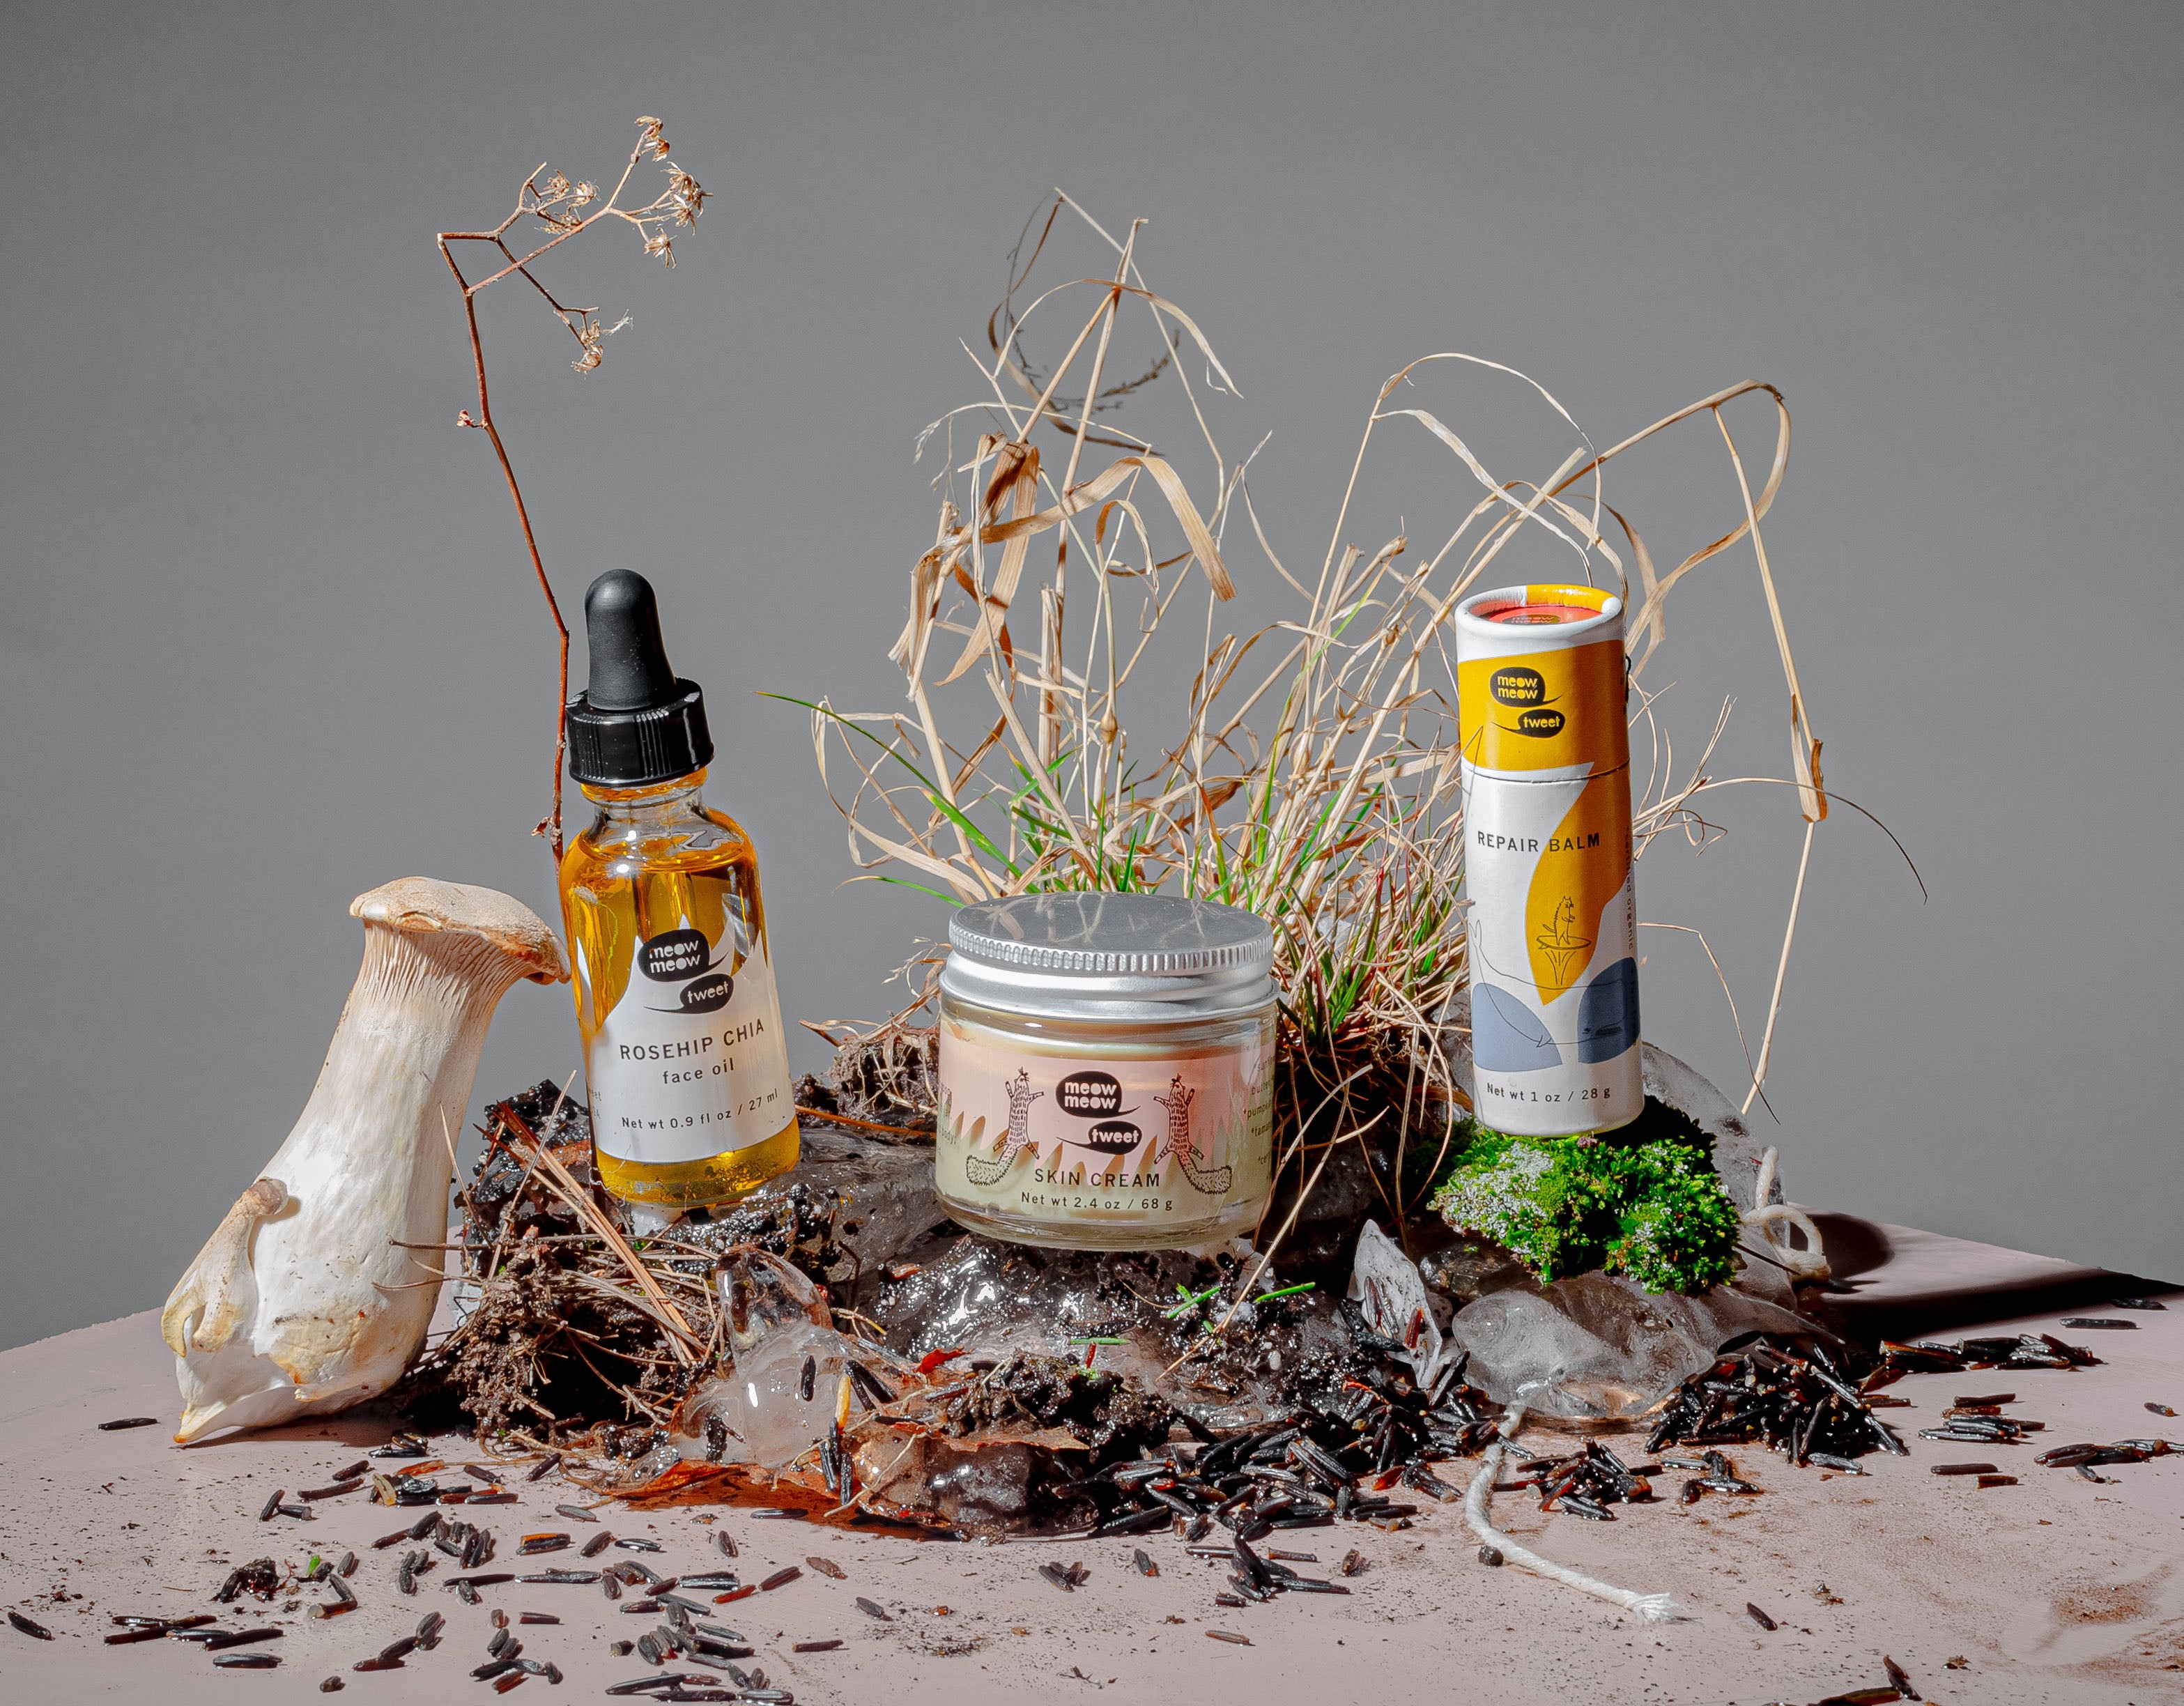 Our skin cream, face oil and repair balm sitting atop a messy pile of ice, mushrooms and dead grass.